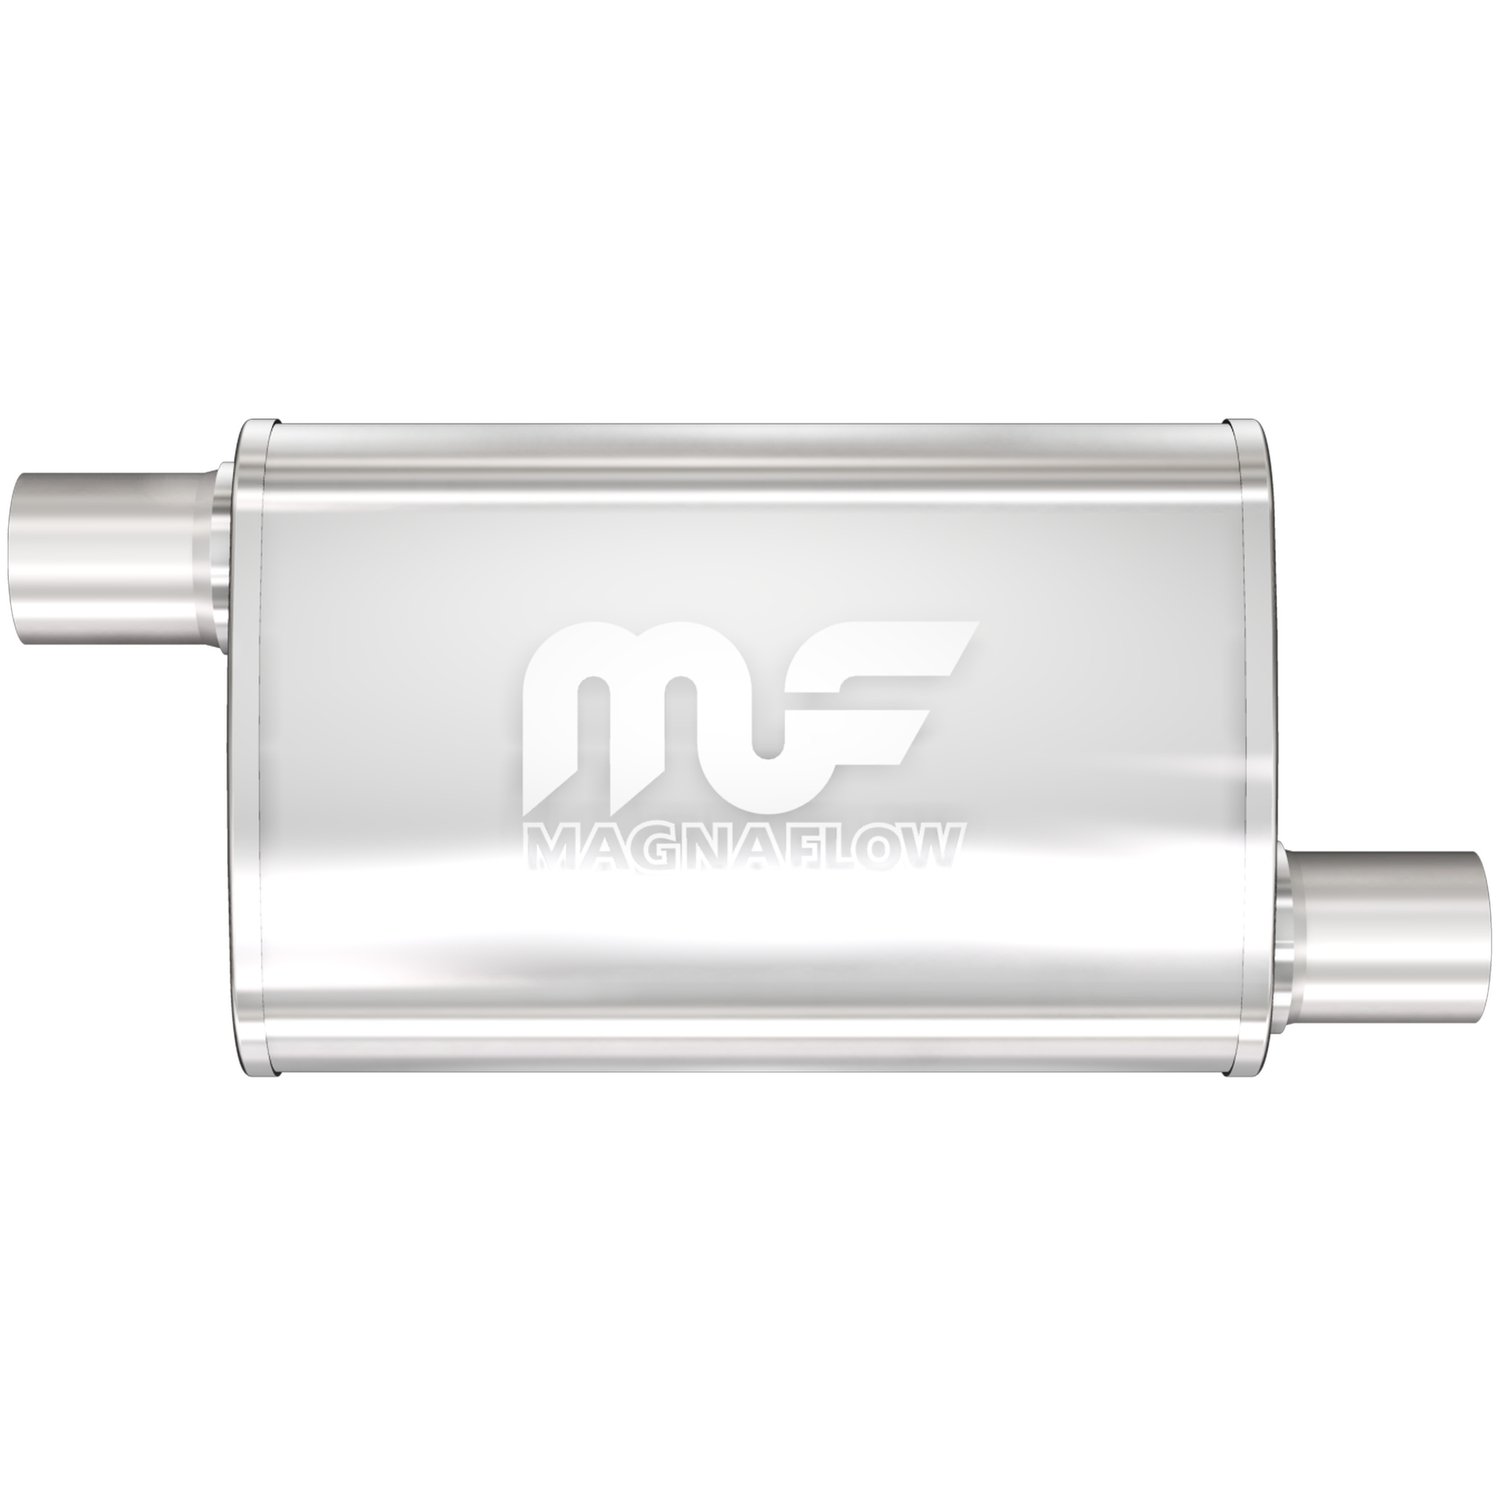 4" x 9" Oval Muffler Offset In/Offset Out: 2.25"/2.25" Body Length: 14" Overall Length: 20" Core Size: 2.5" Satin Finish